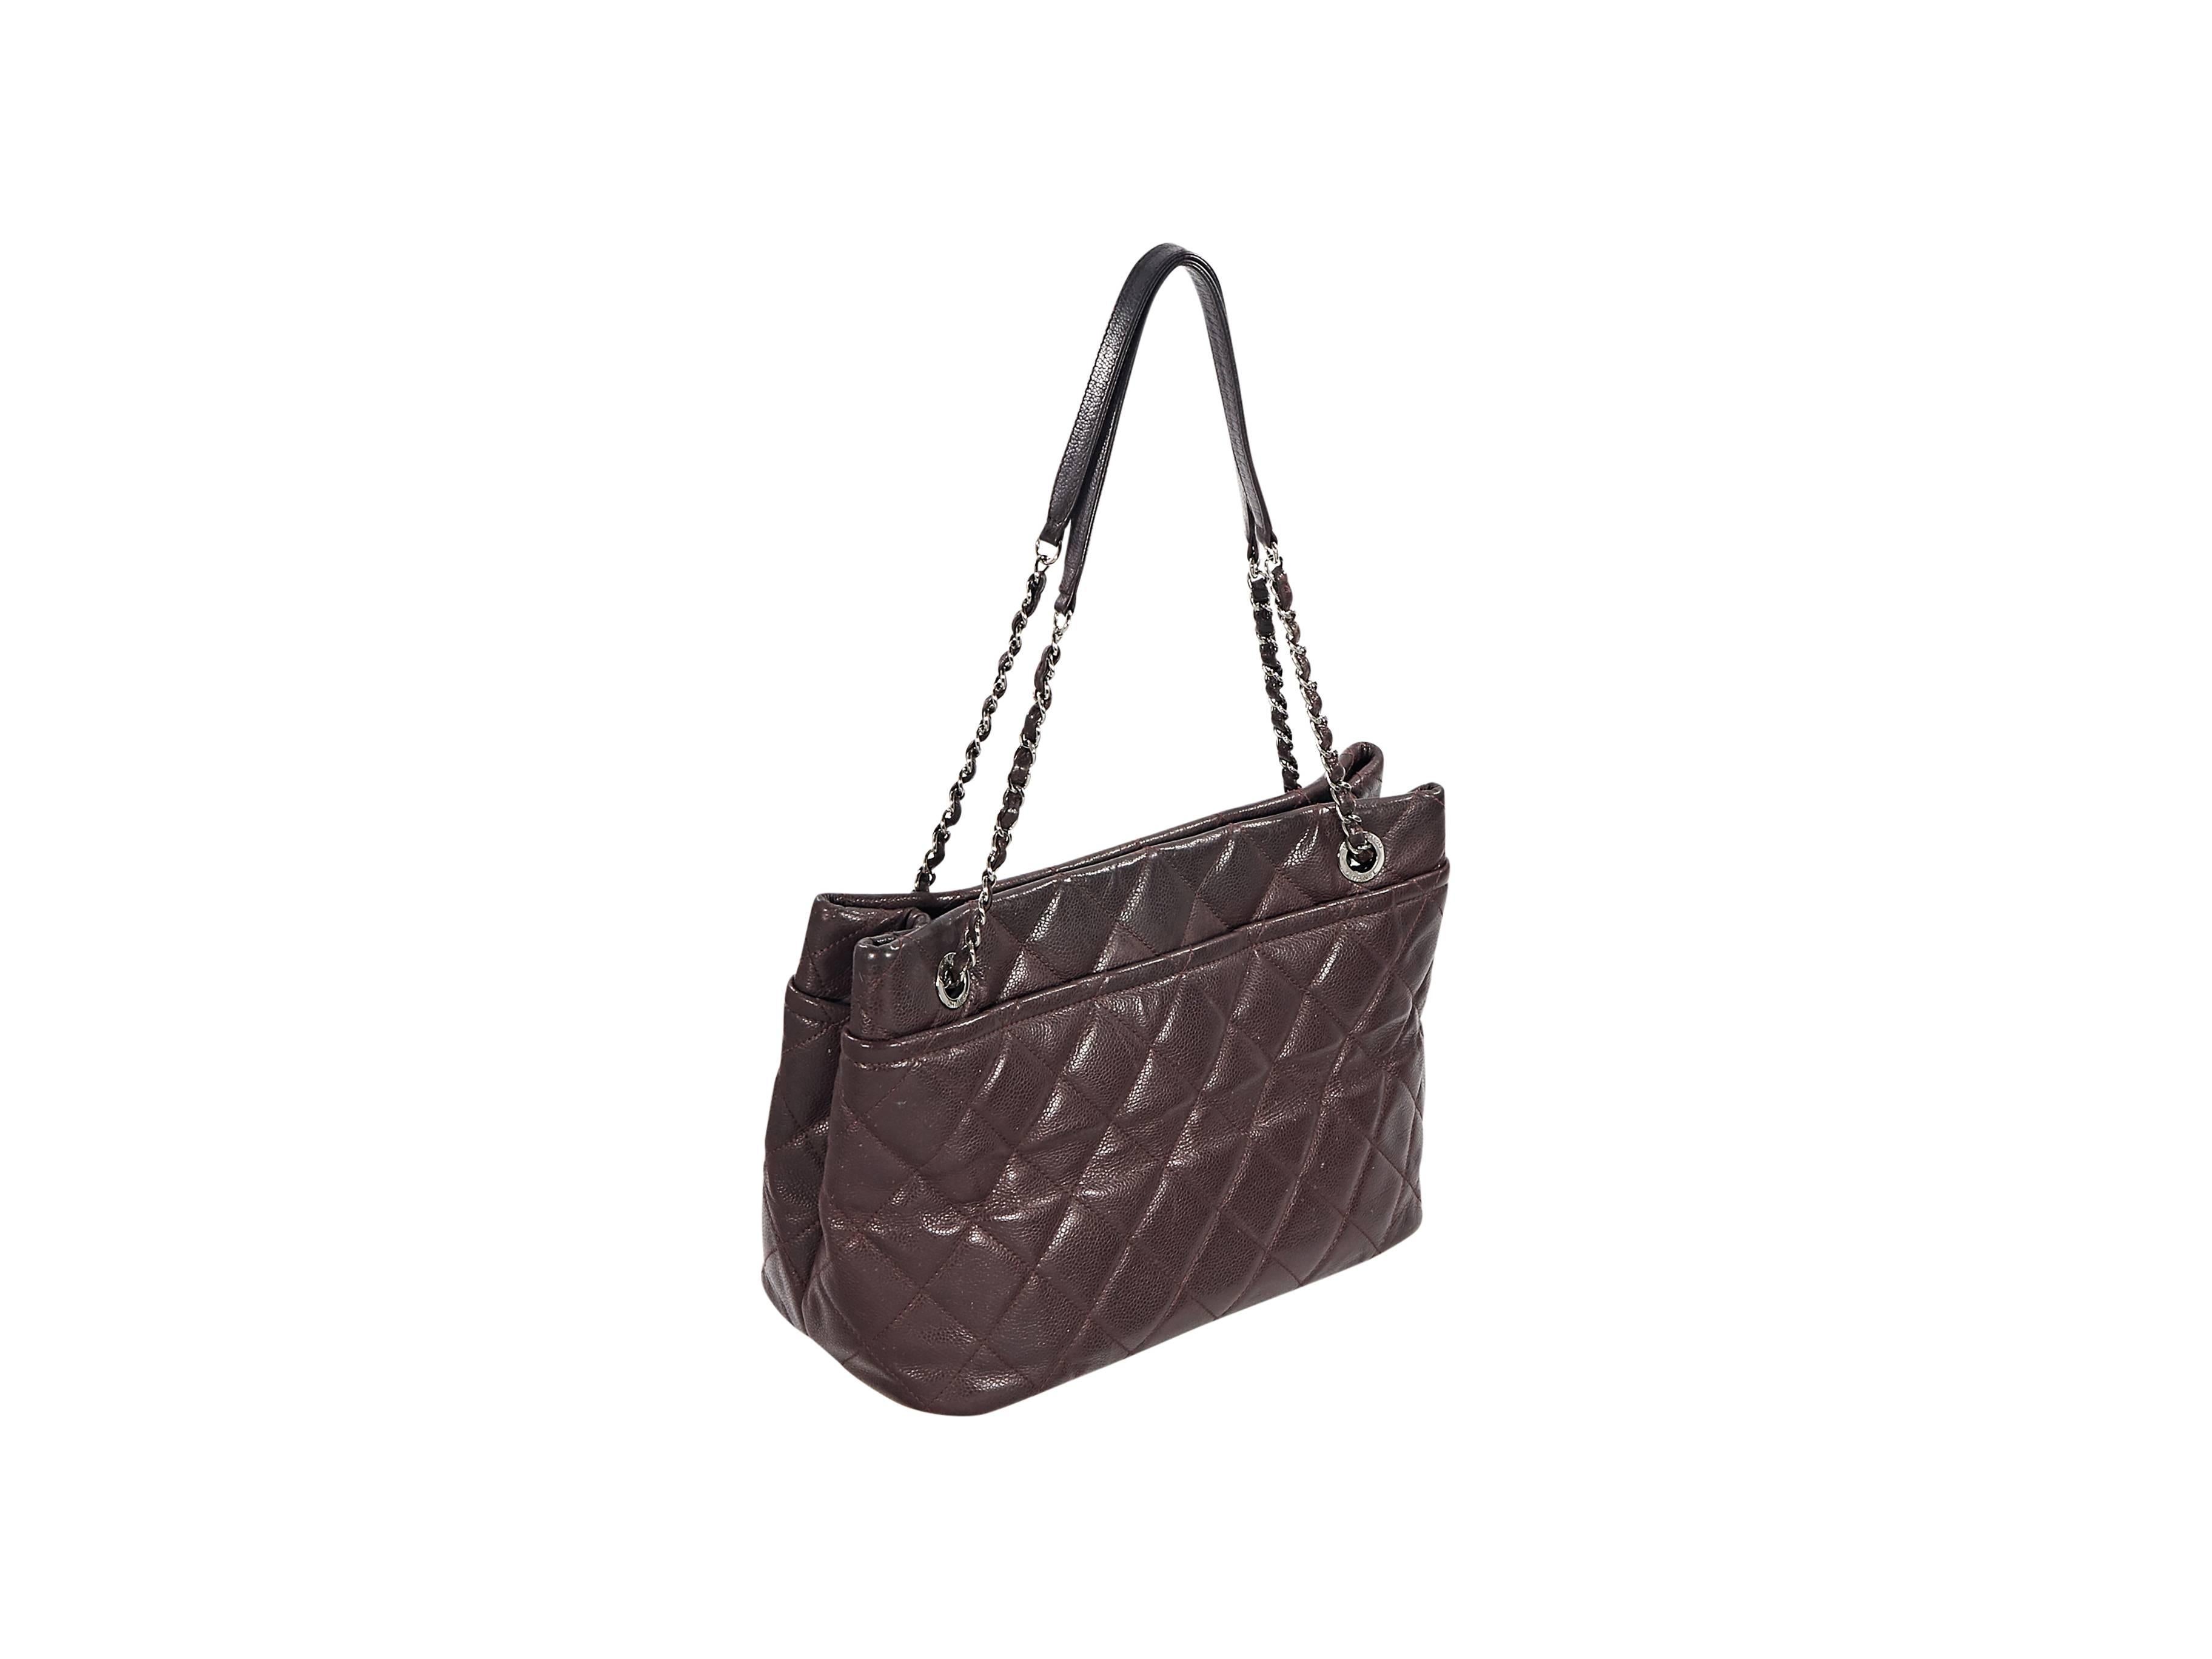 Product details:  Burgundy quilted caviar leather tote bag by Chanel.  Features oversized CC logo at front.  Dual shoulder straps.  Magnetic snap closure.  Lined interior with inner zip and slide pockets plus attached key strap.  Protective metal